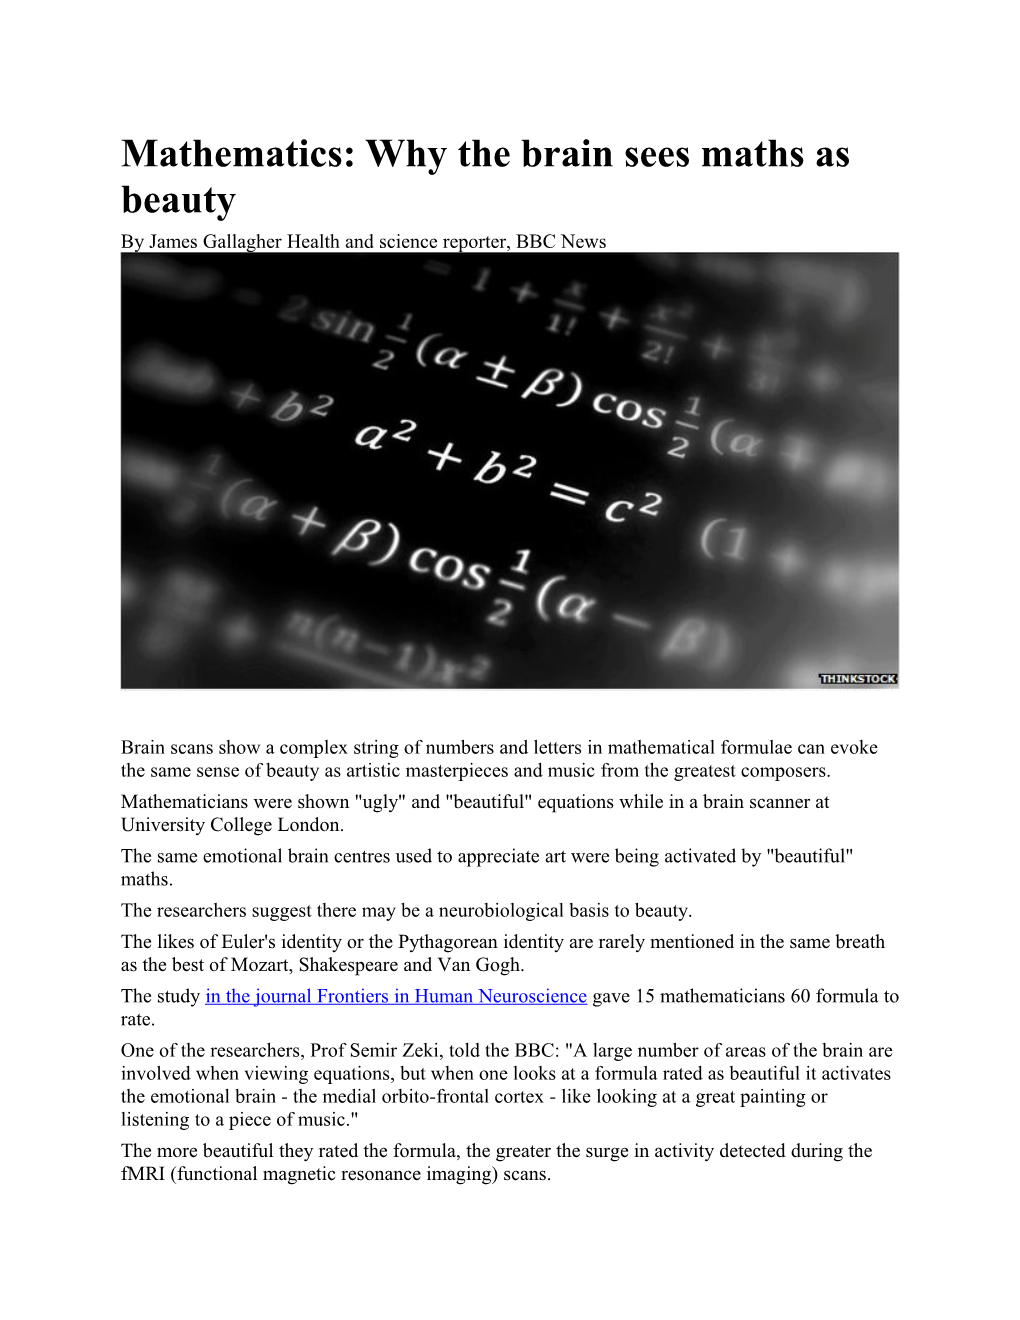 Mathematics: Why the Brain Sees Maths As Beauty